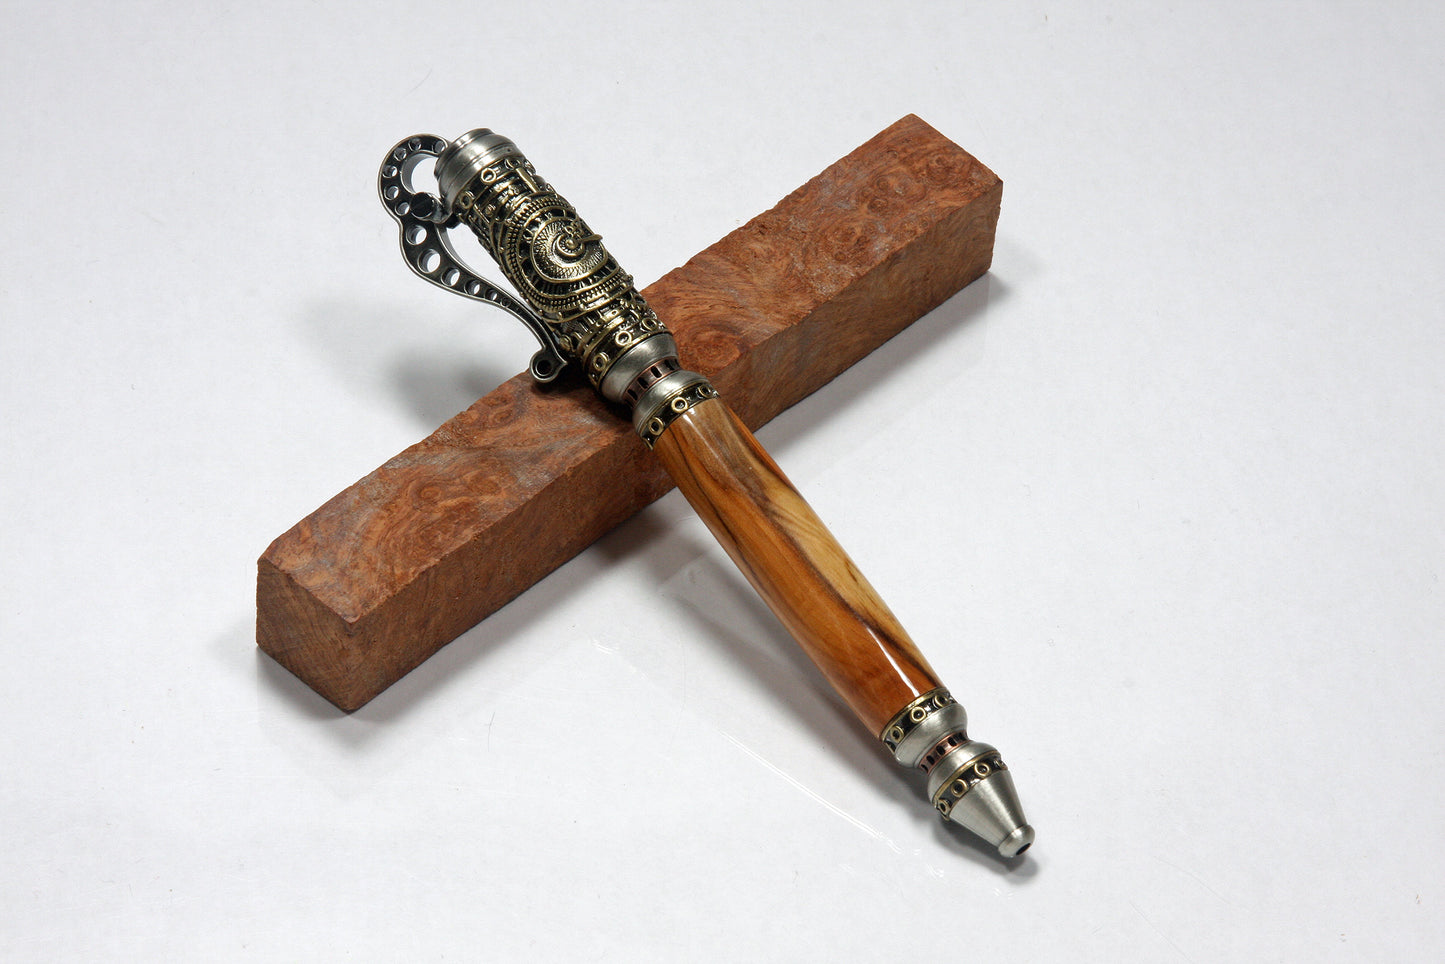 Dr. Who Forest of Dean Steampunk Ballpoint Pen - Handcrafted Yew Wood, Vintage Aesthetics, Collector's Delight